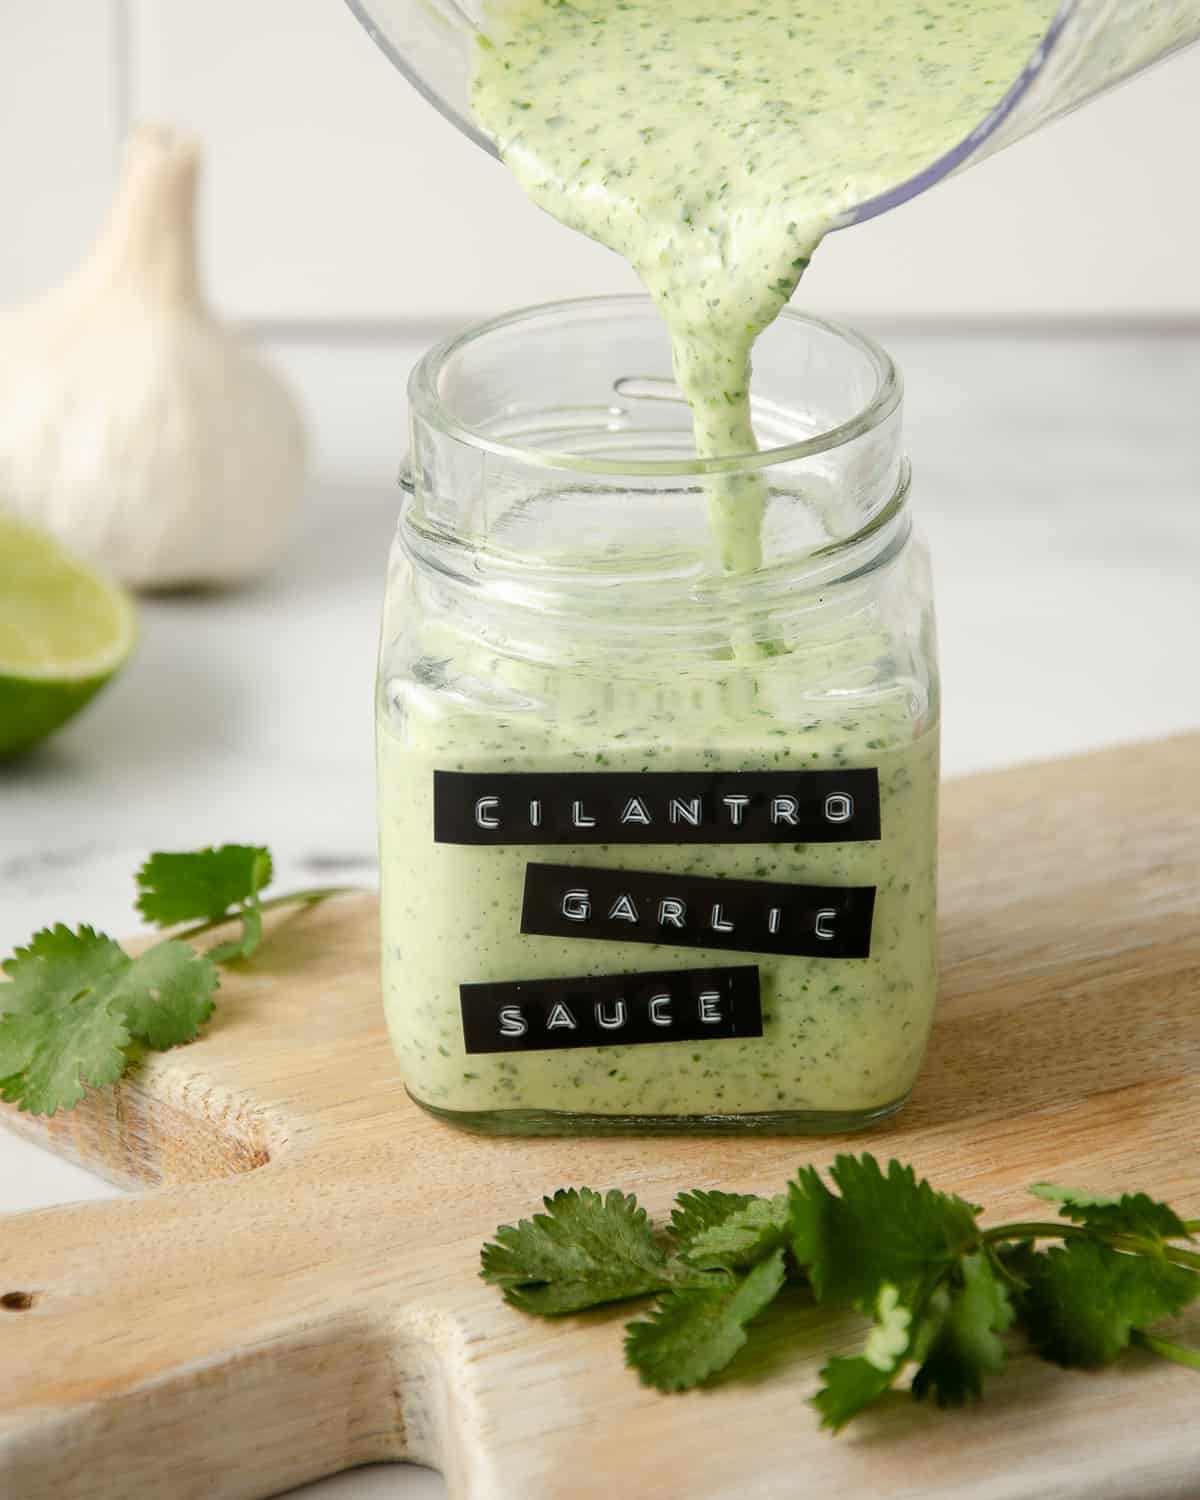 Pouring cilantro garlic sauce into a labeled jar on a cutting board.